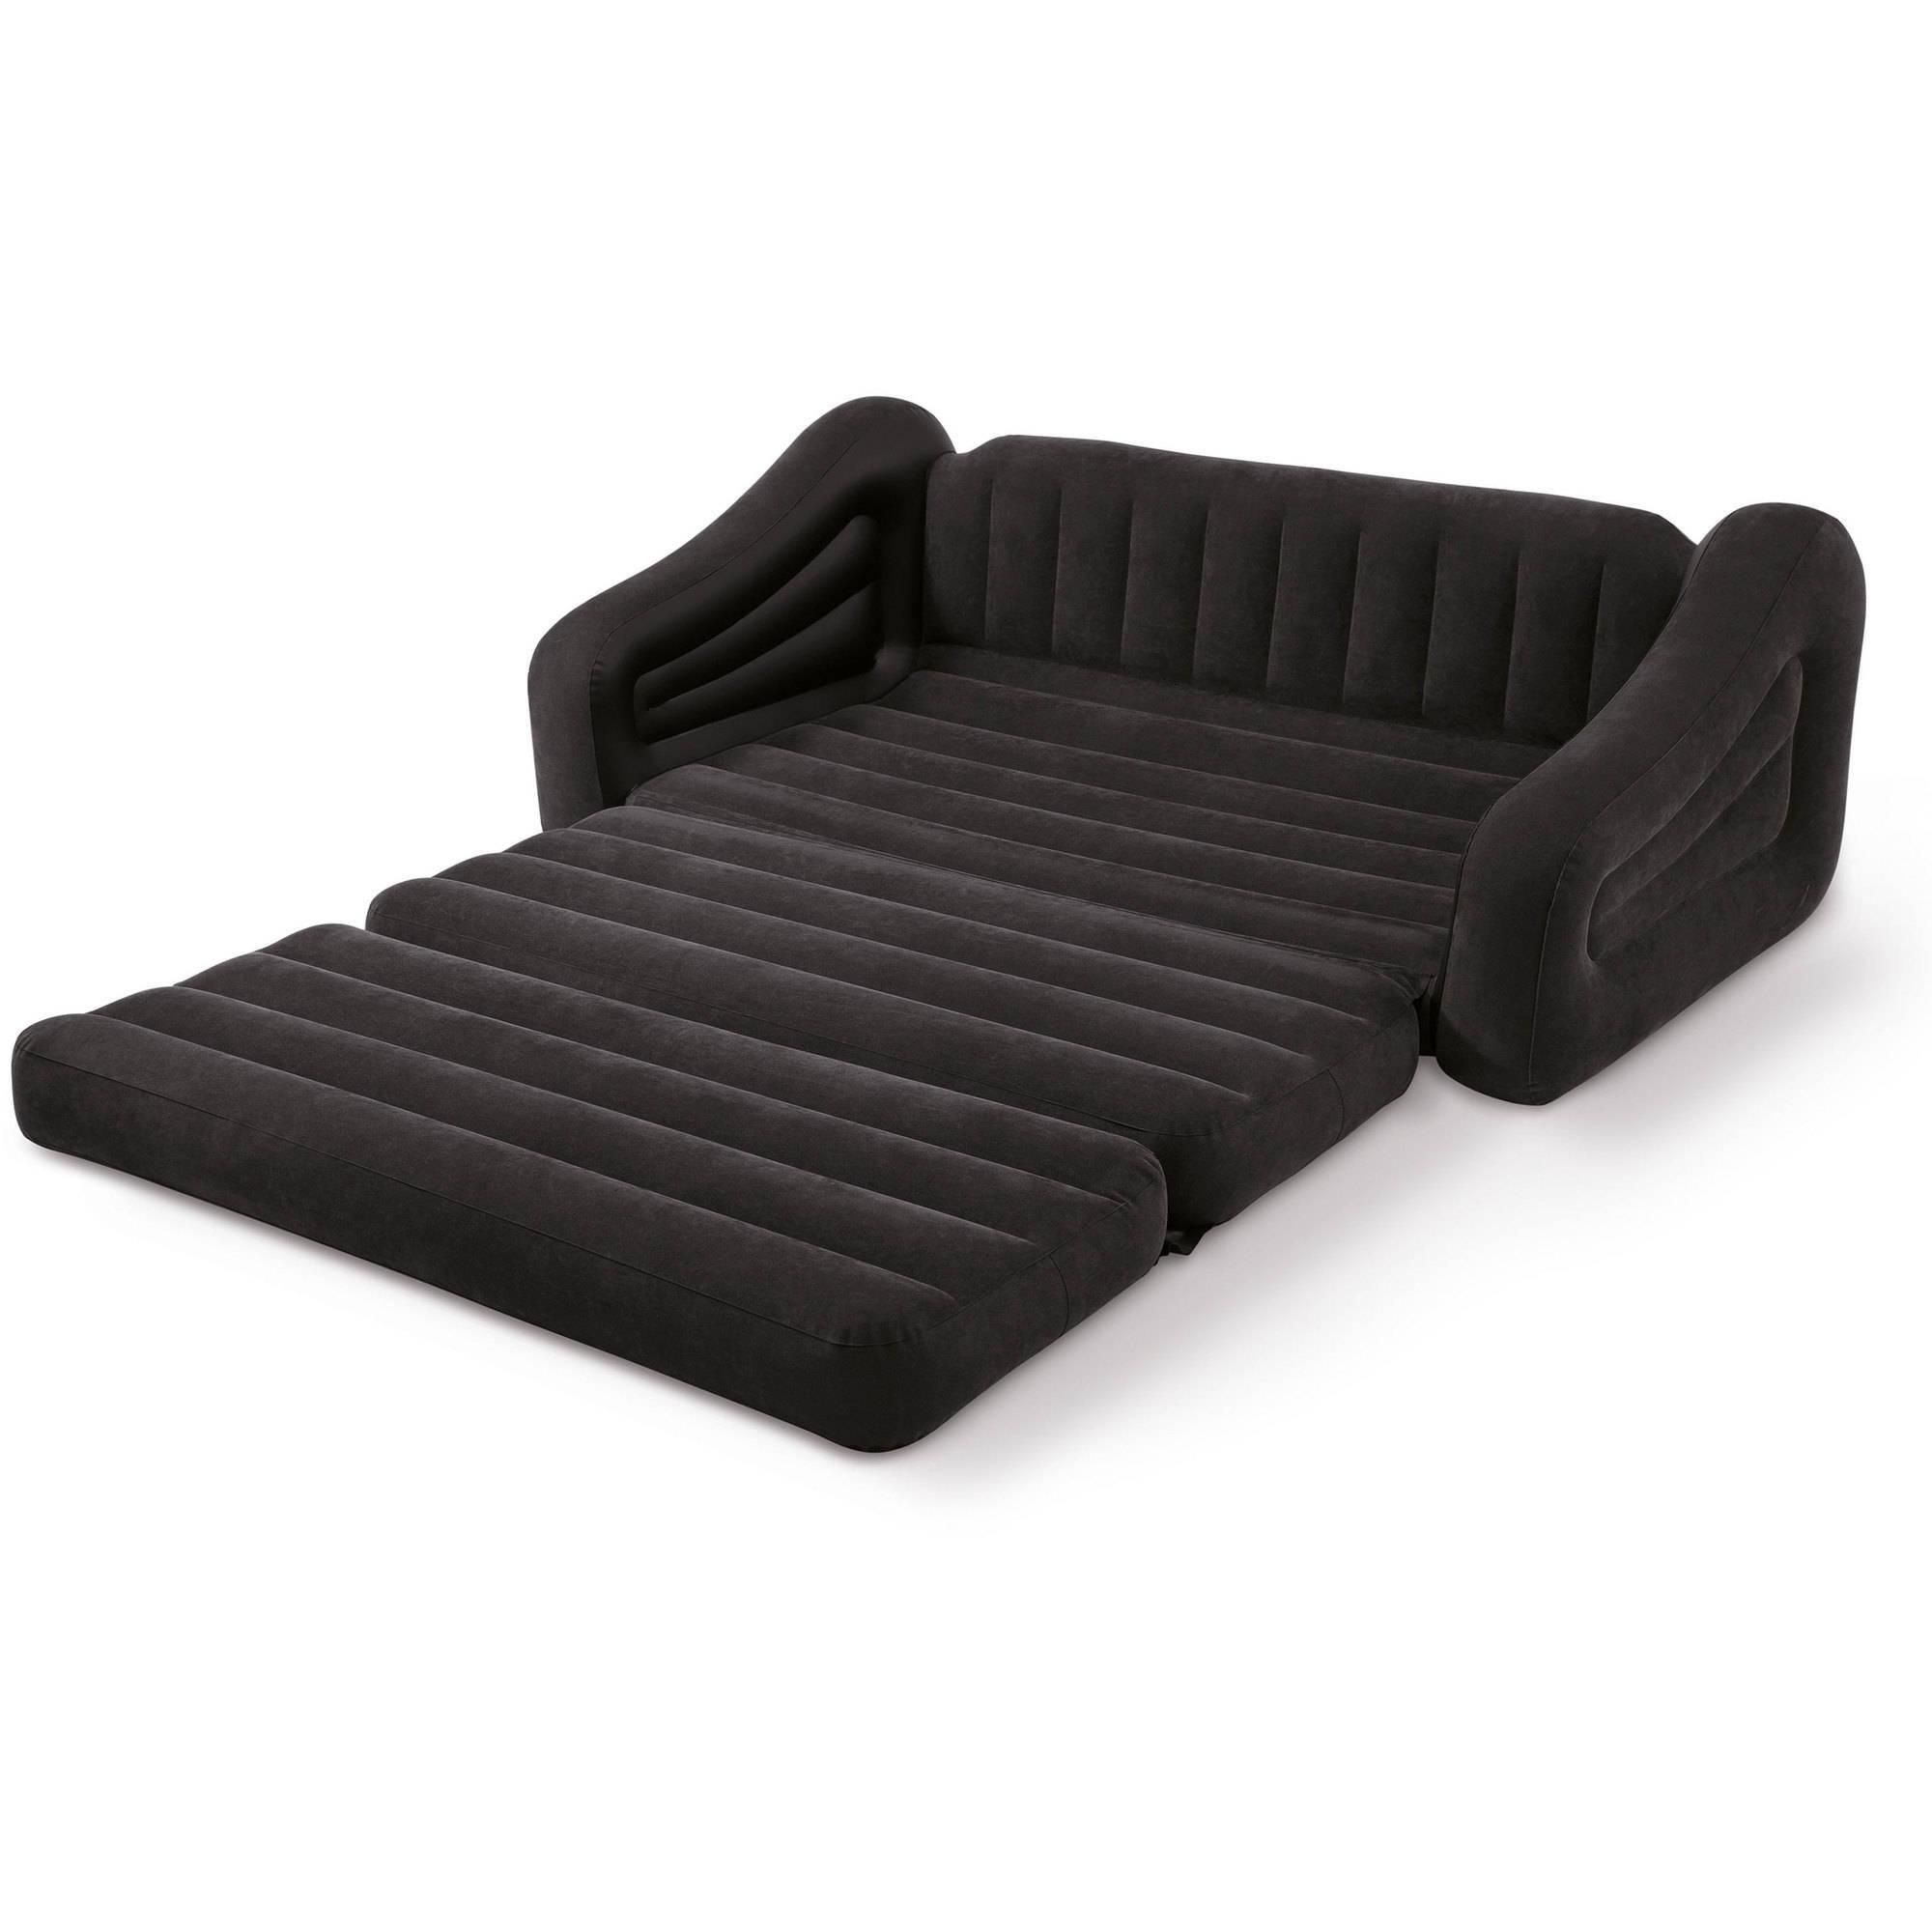 Blow Up Sofa, 15 Best Inflatable Outdoor Sofas, Perfect For Regarding Intex Air Couches (View 3 of 20)